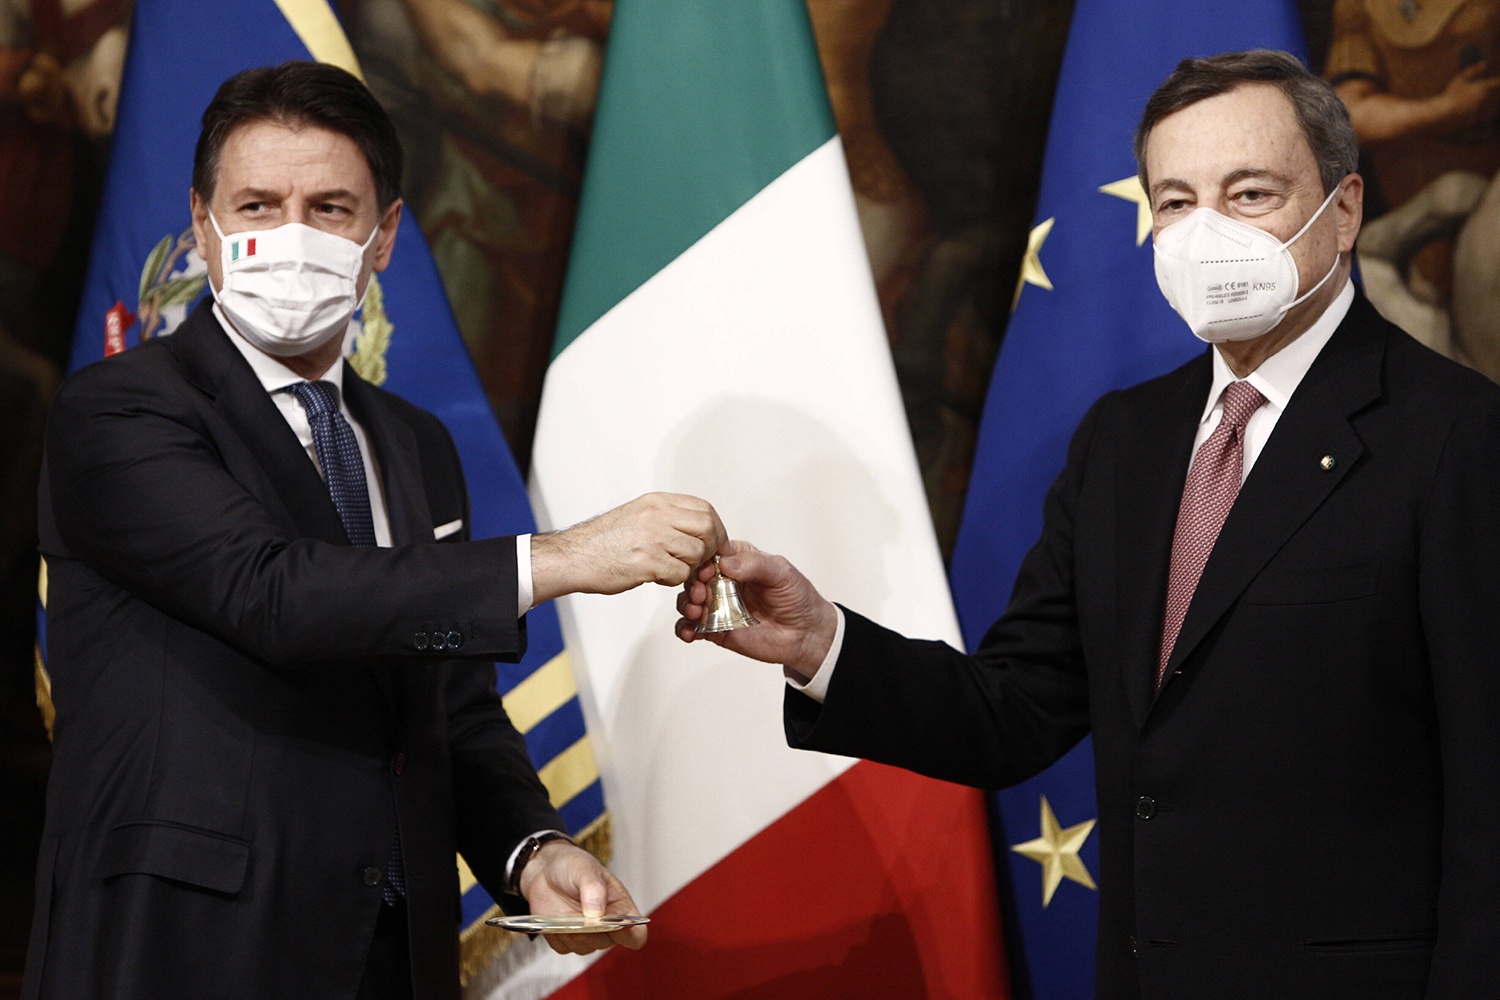 How To Get Away With A Government Crisis: Italy’s Cabinet’s Reshuffle In Times Of Pandemic